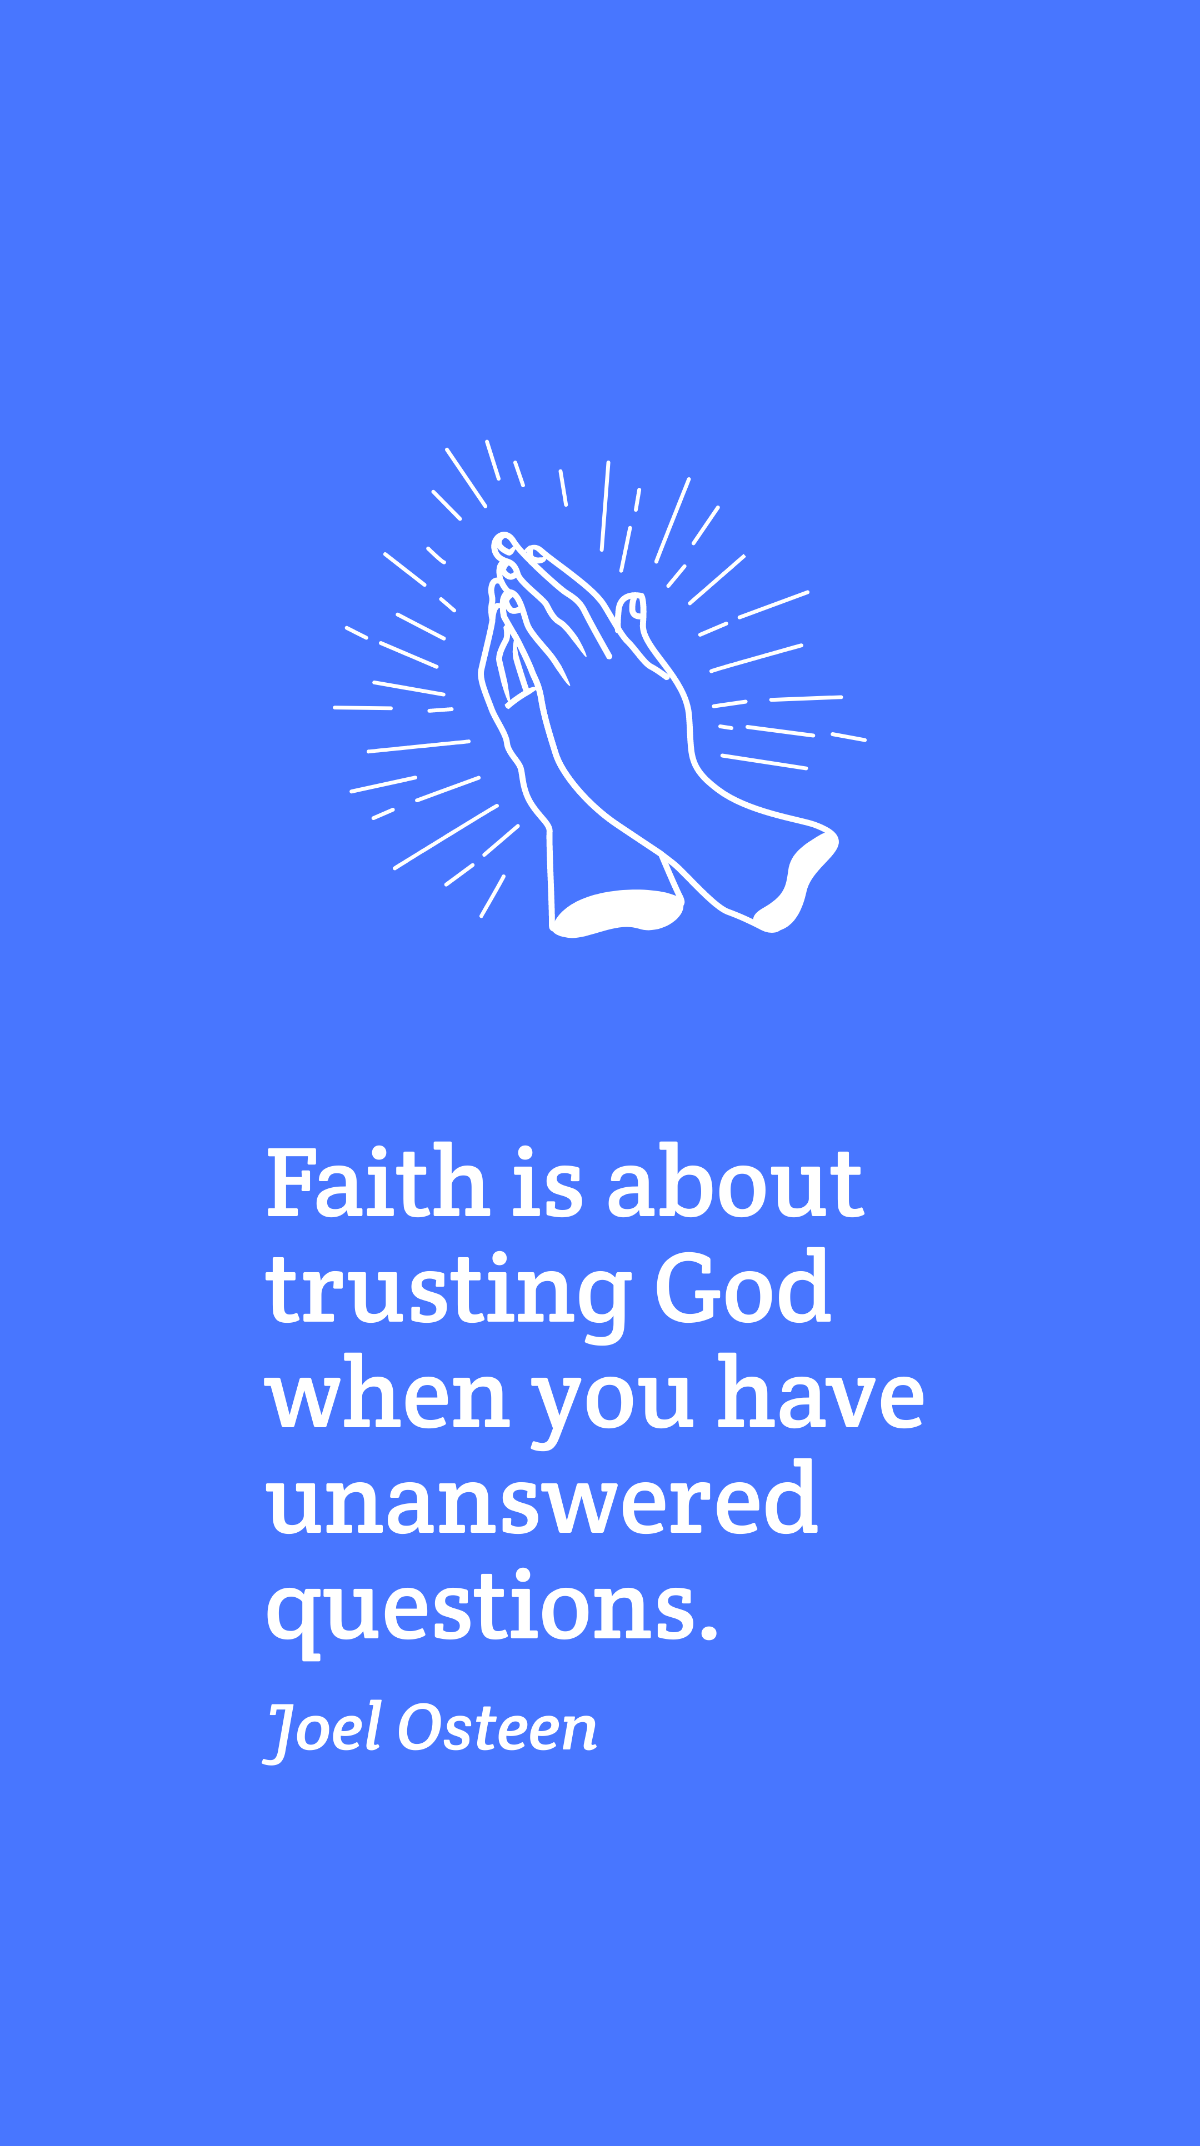 Free Joel Osteen - Faith is about trusting God when you have unanswered questions. Template